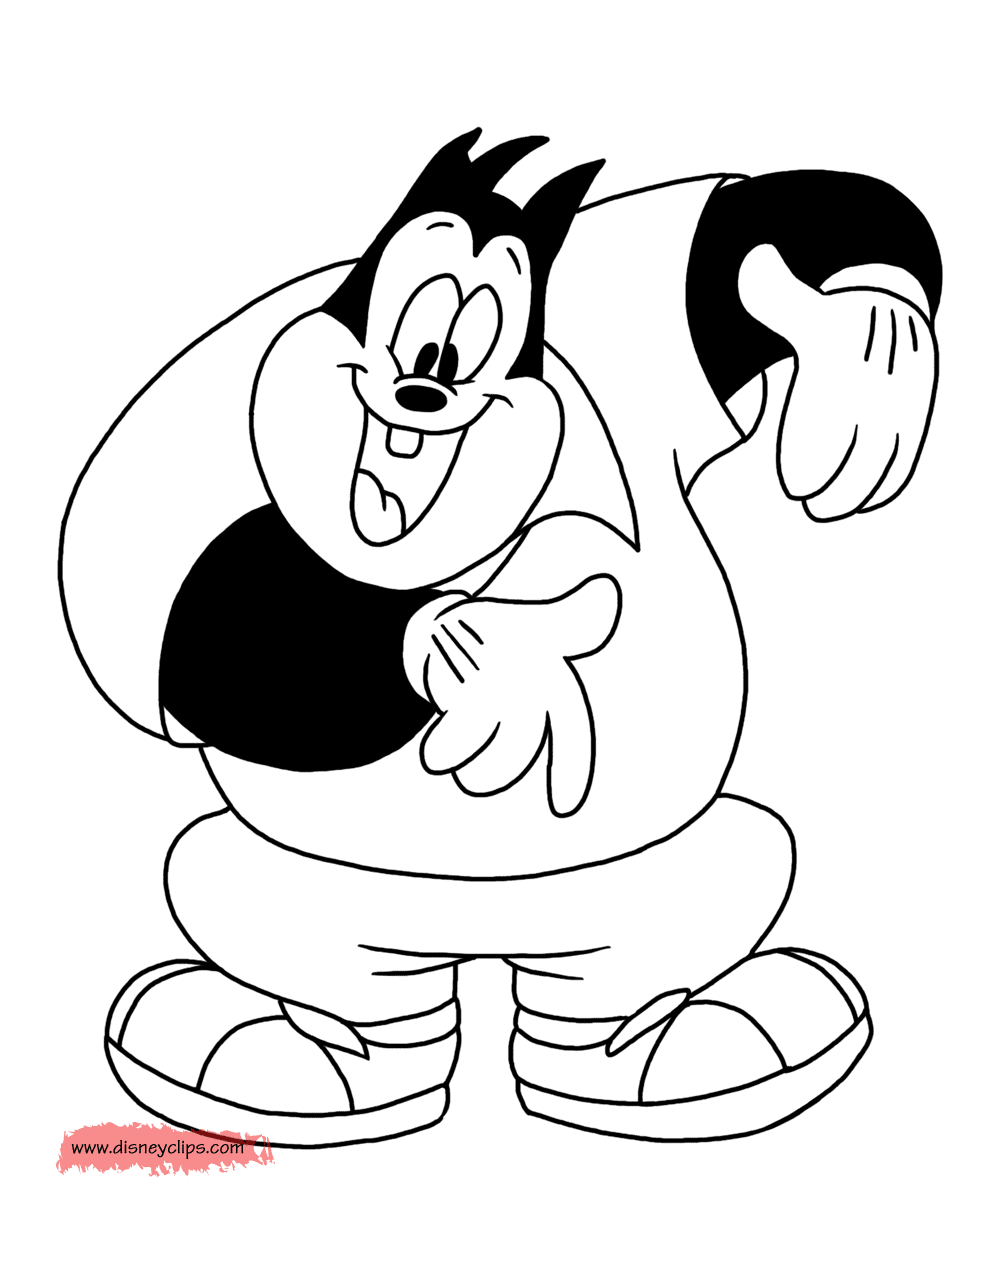 Goof Troop Coloring Pages | Disneyclips.com